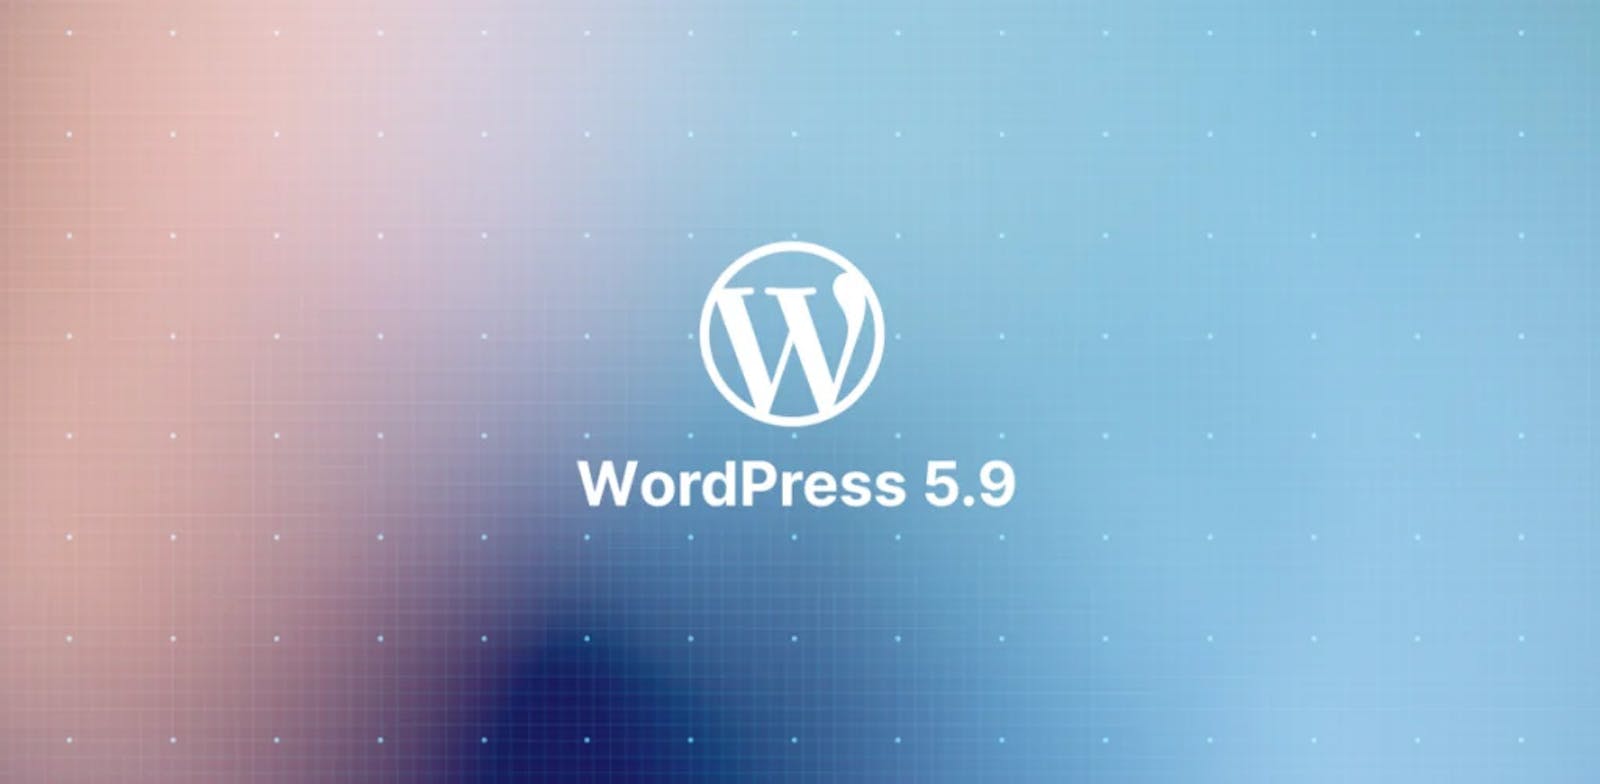 The WordPress Block-Based Ecosystem Reaches Fruition